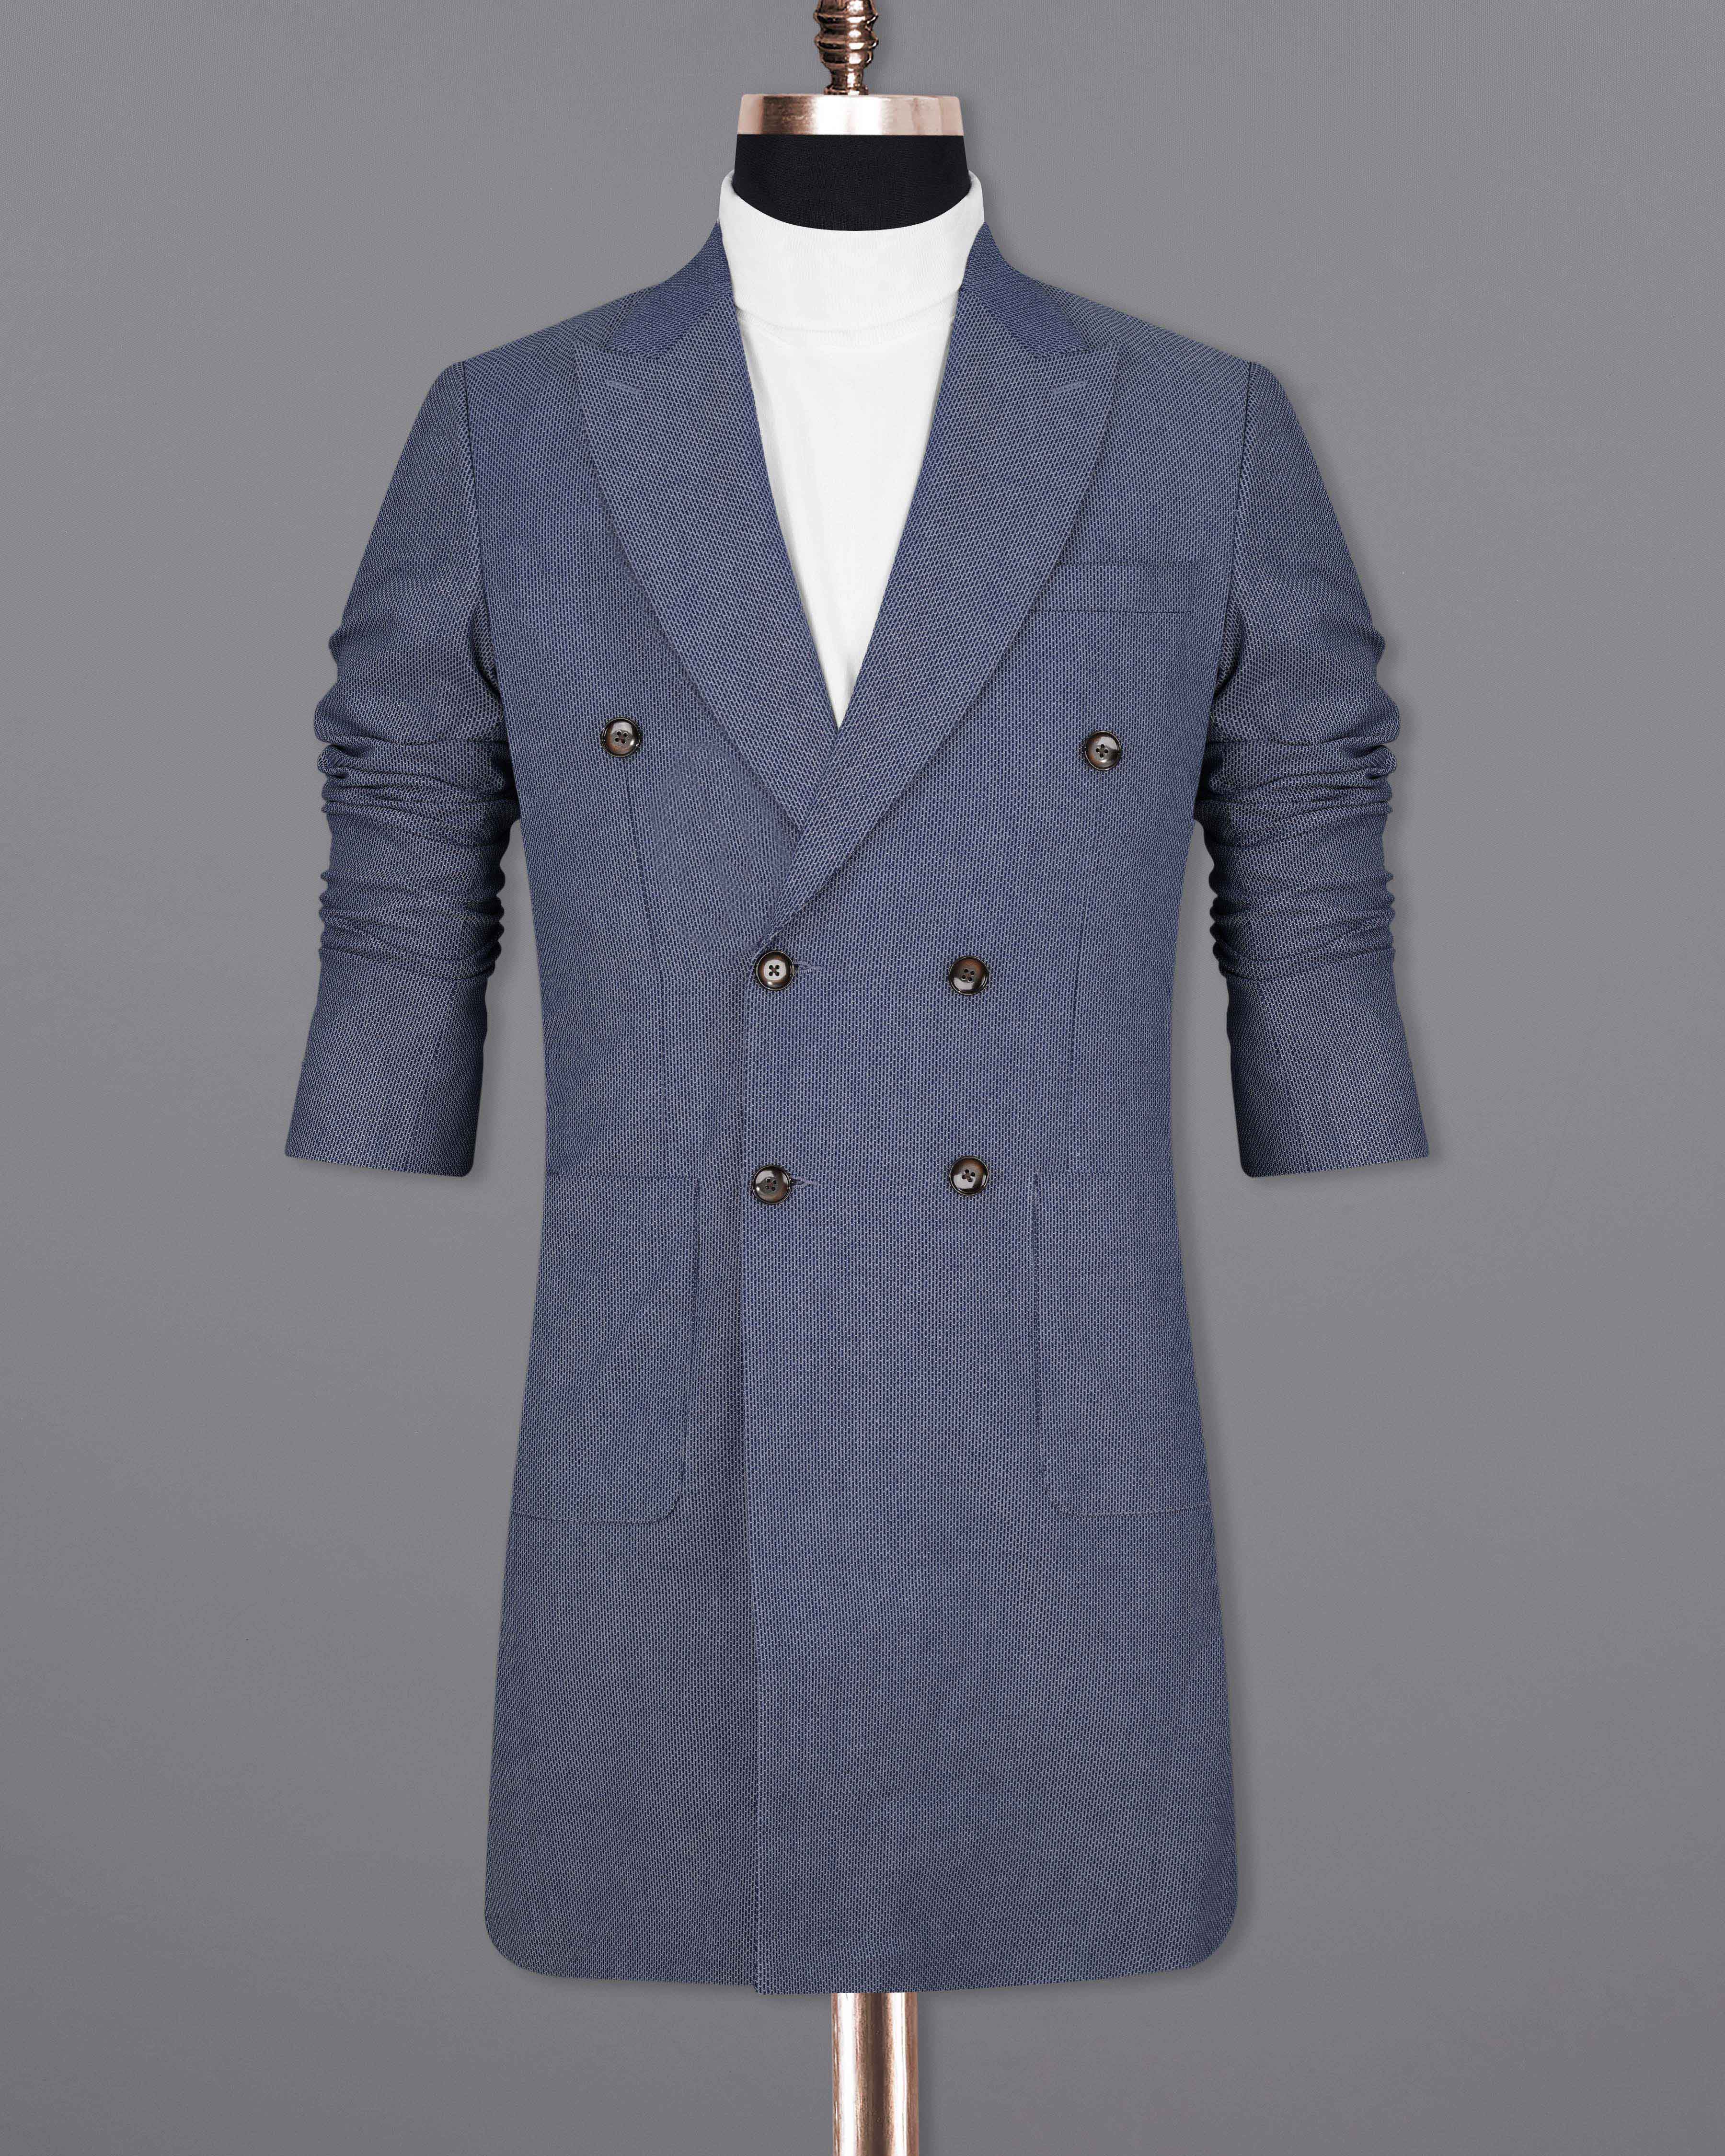 Limed Spruce Blue Double Breasted Trench Coat TCB2074-DB-PP-36, TCB2074-DB-PP-38, TCB2074-DB-PP-40, TCB2074-DB-PP-42, TCB2074-DB-PP-44, TCB2074-DB-PP-46, TCB2074-DB-PP-48, TCB2074-DB-PP-50, TCB2074-DB-PP-52, TCB2074-DB-PP-54, TCB2074-DB-PP-56, TCB2074-DB-PP-58, TCB2074-DB-PP-60